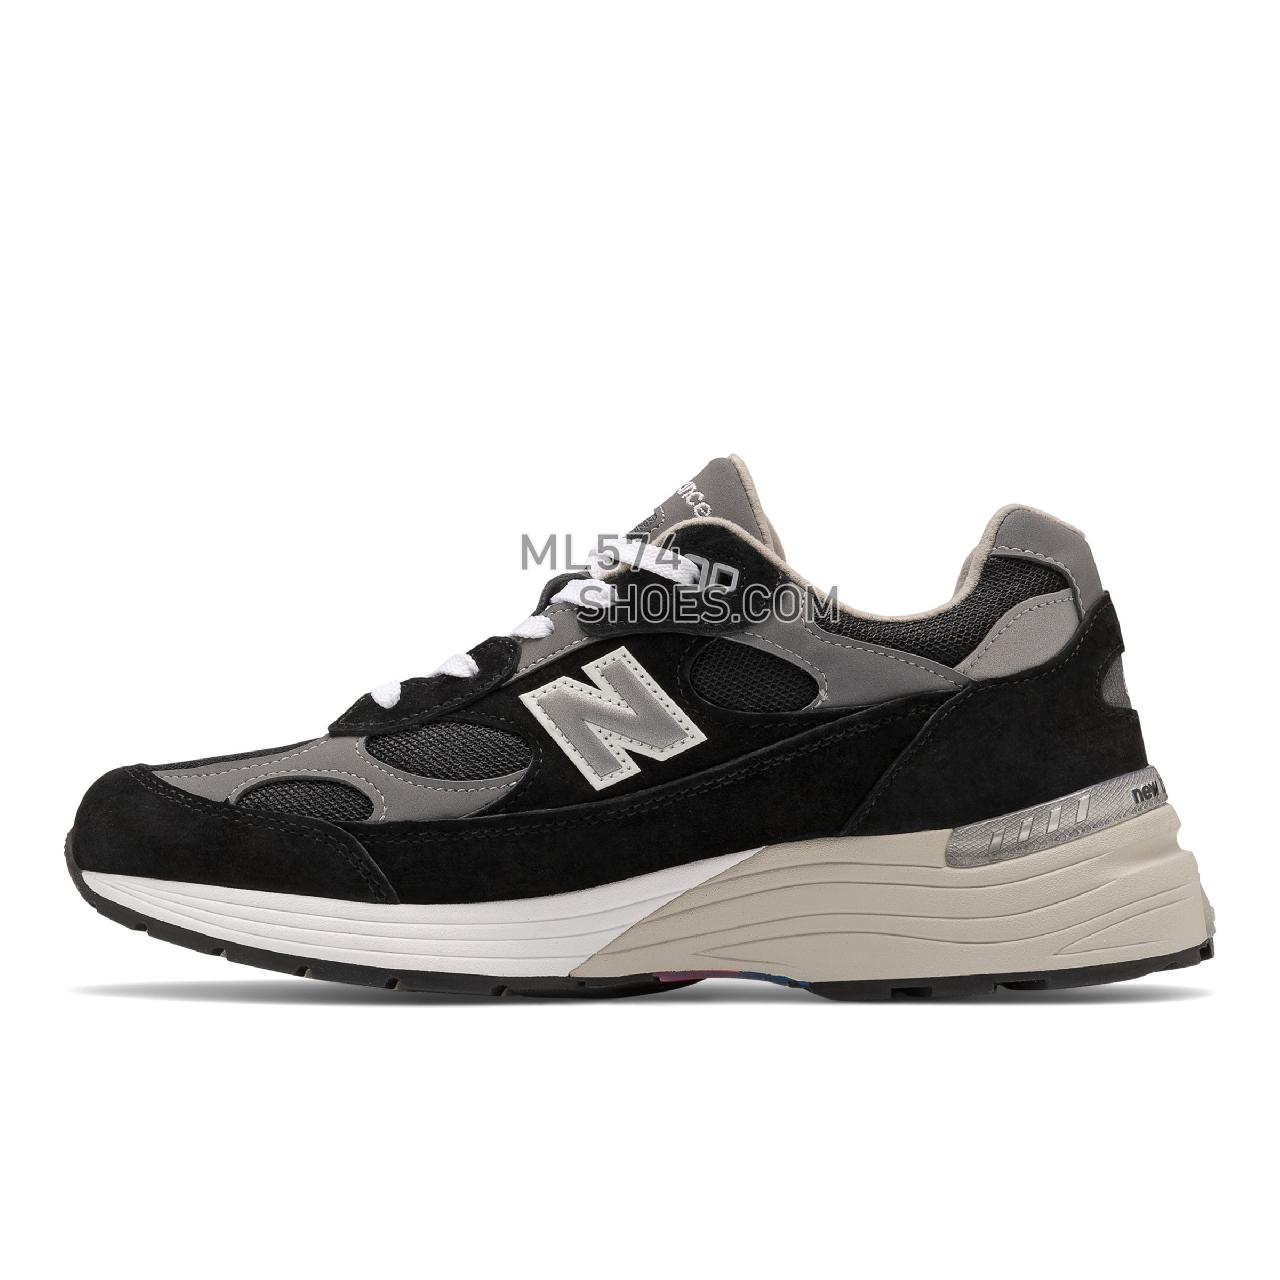 New Balance Made in US 992 - Men's Made in USA And UK Sneakers - Black with Grey - M992EB